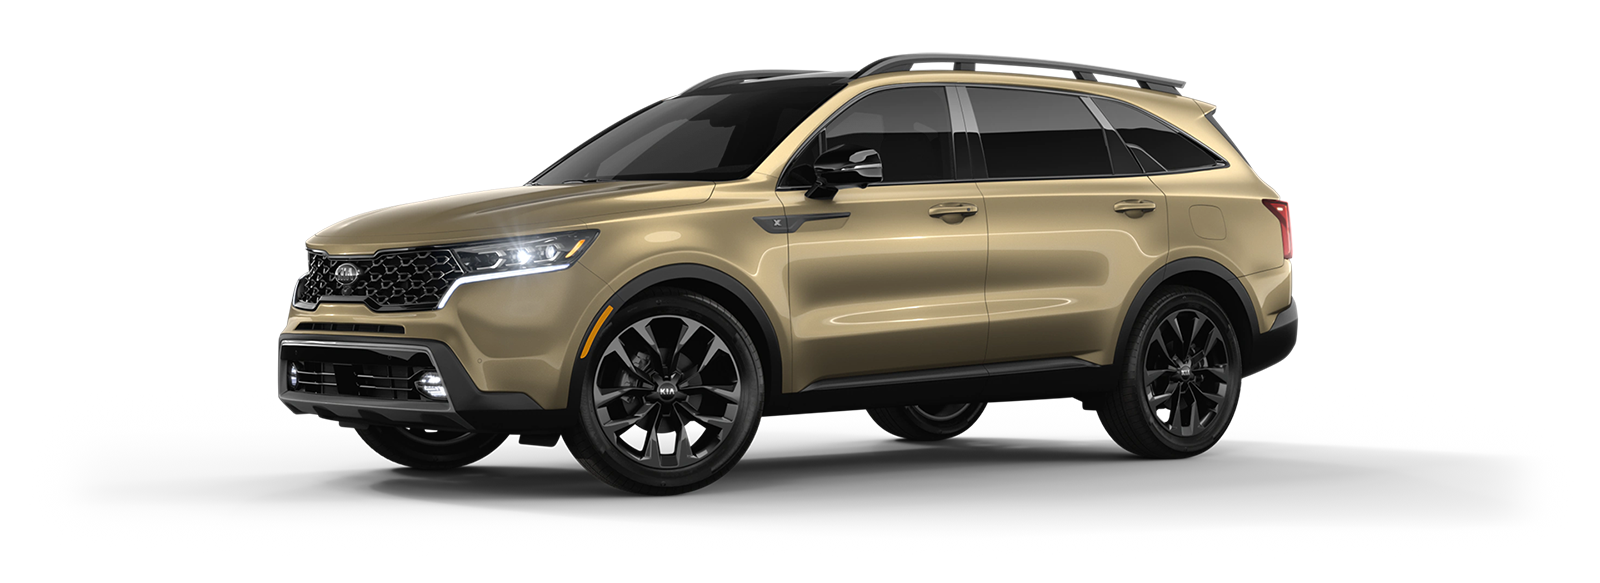 2021 Kia Sorento in Crystal Beige | Fort Collins Kia in Fort Collins CO